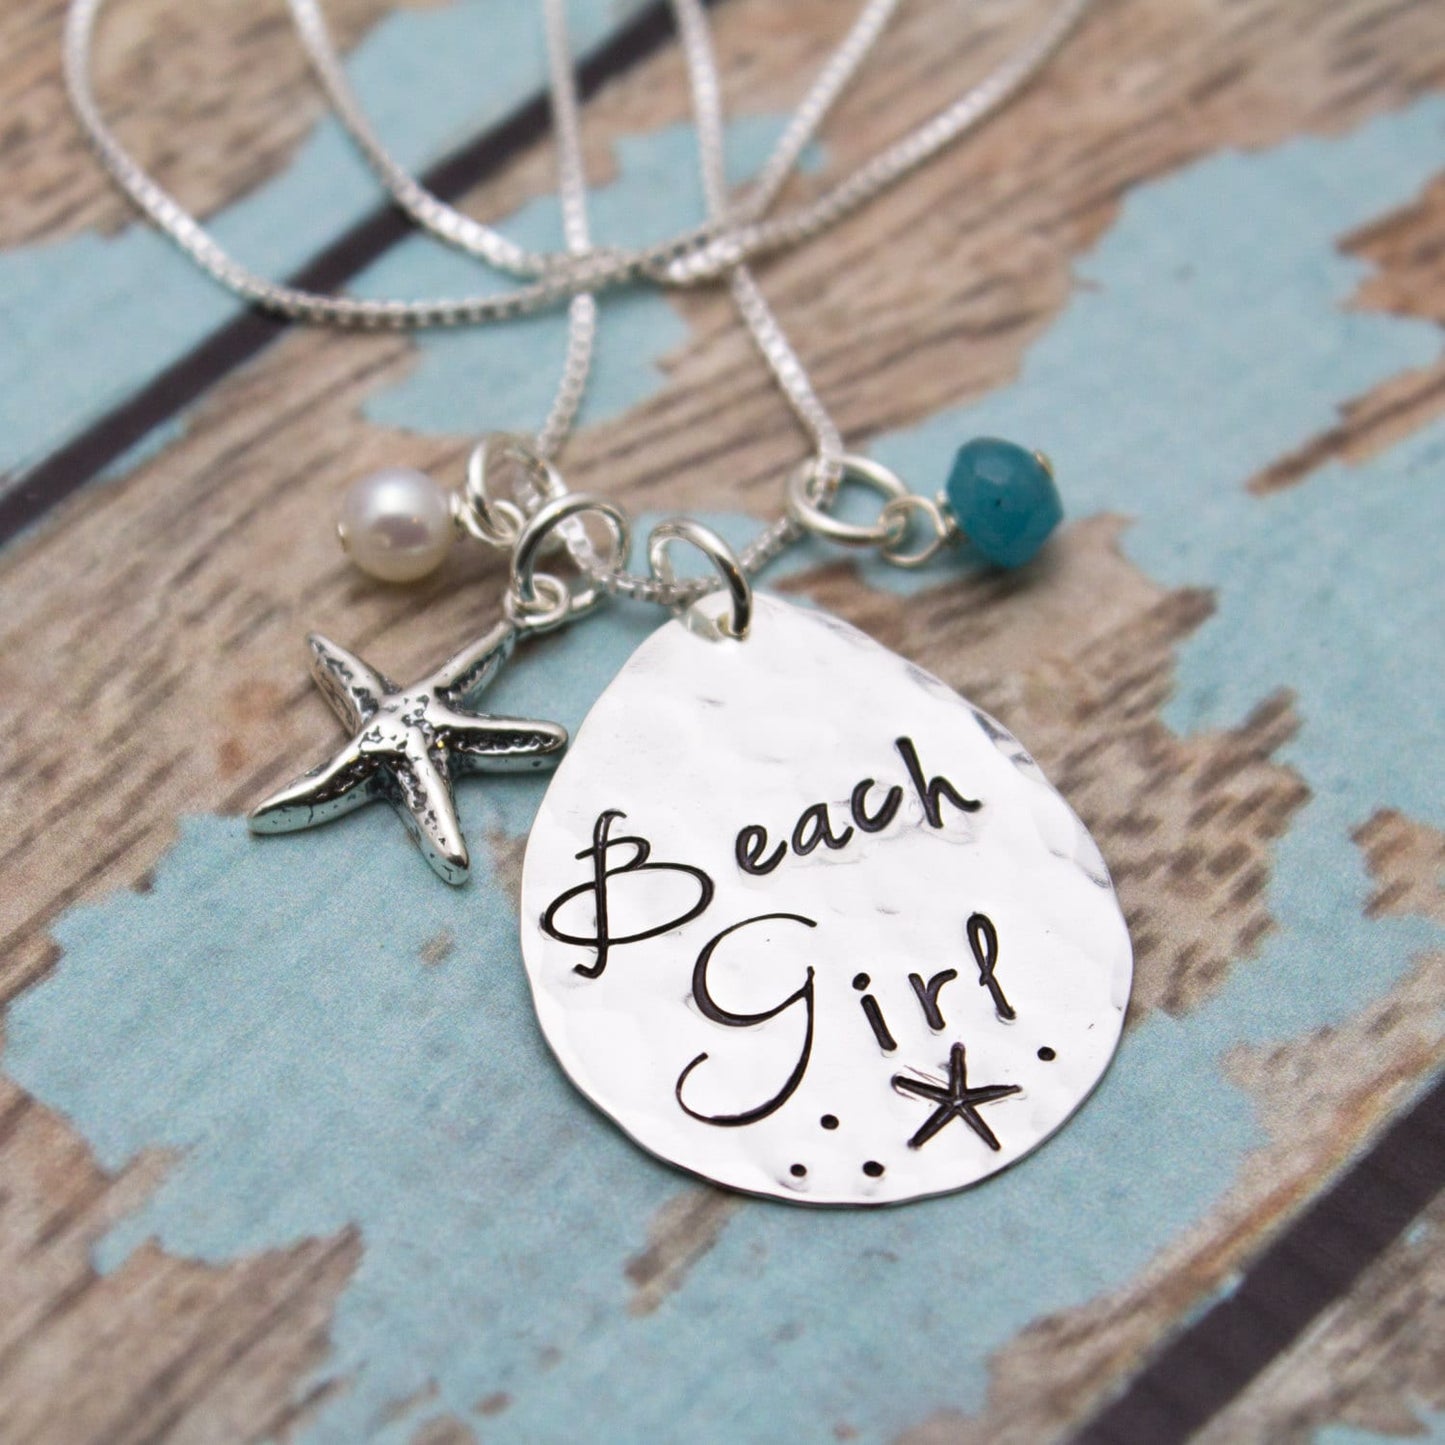 BEACH GIRL Necklace, Starfish Necklace, Beach Jewelry, Stamped Necklace, Pearl, Aqua Bead, Hand Stamped Jewelry